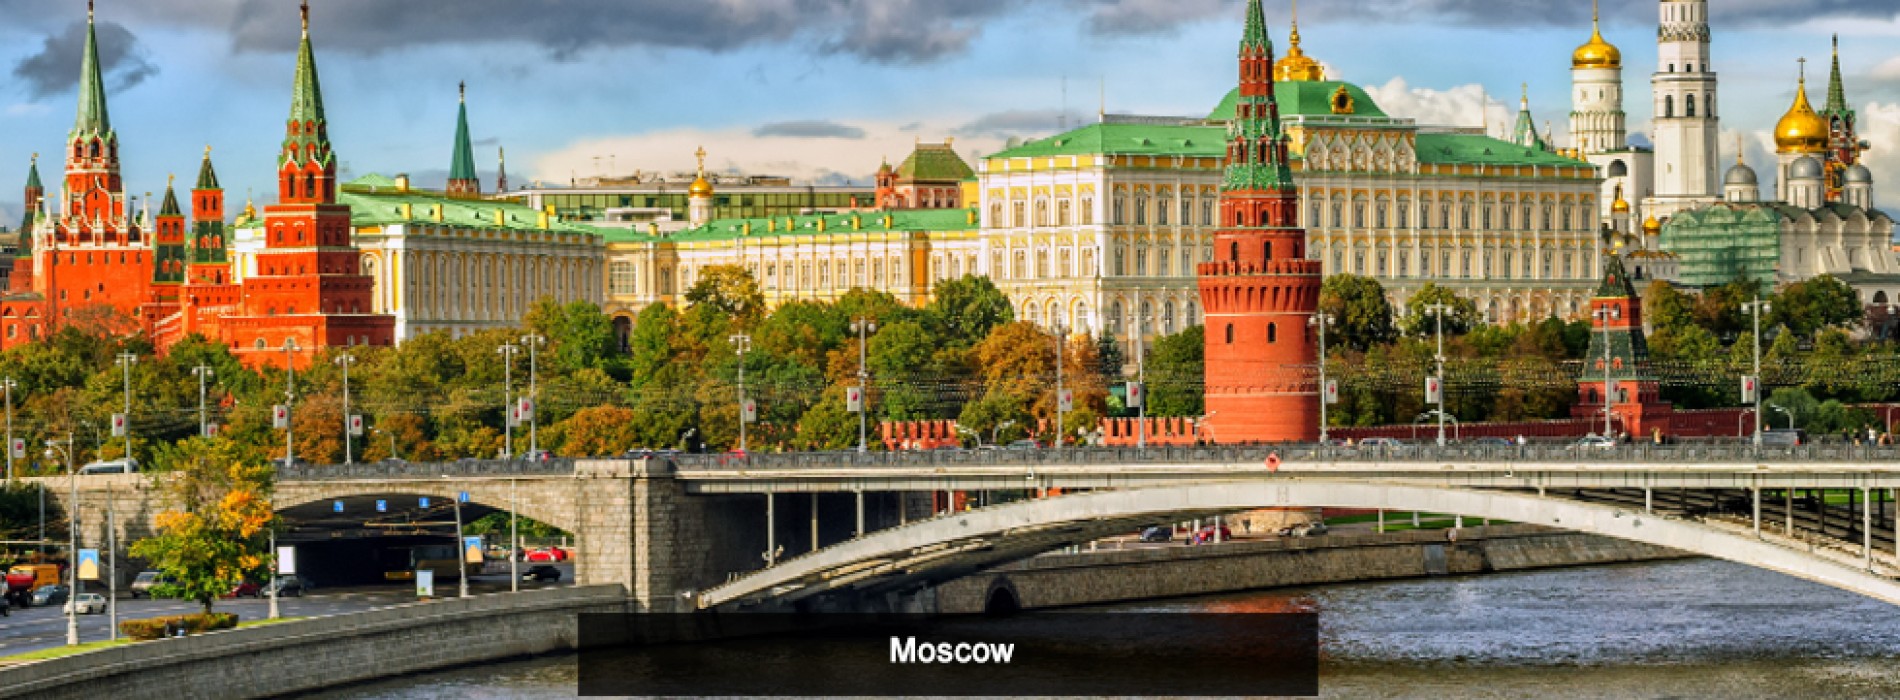 flydubai expands its footprint in Moscow with new service to Sheremetyevo International Airport